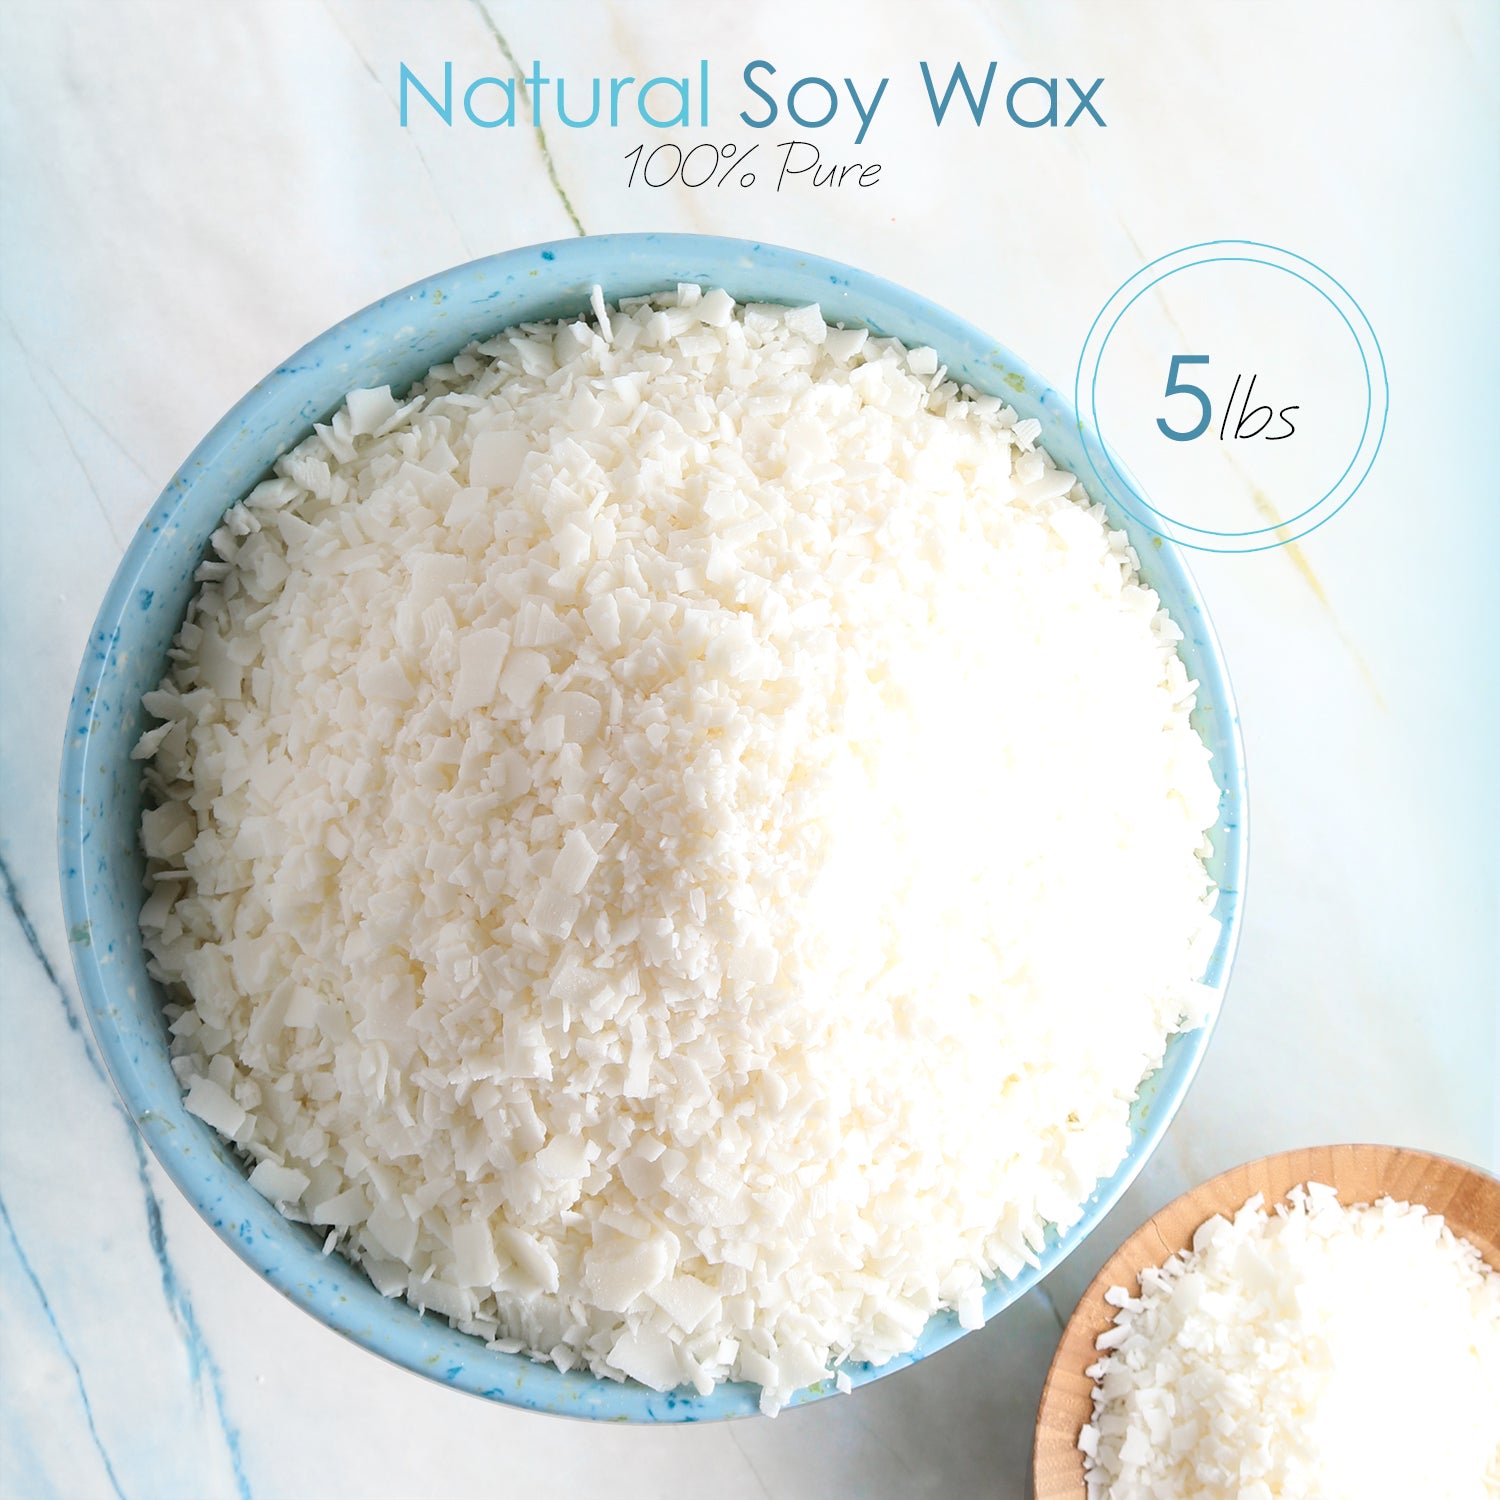 PILLAR Soy Wax, All Natural for Wax Melts, Molds, Votives, and Tarts, 1lb,  5lbs, 10lbs, 20lbs, 30lbs, 45lbs 